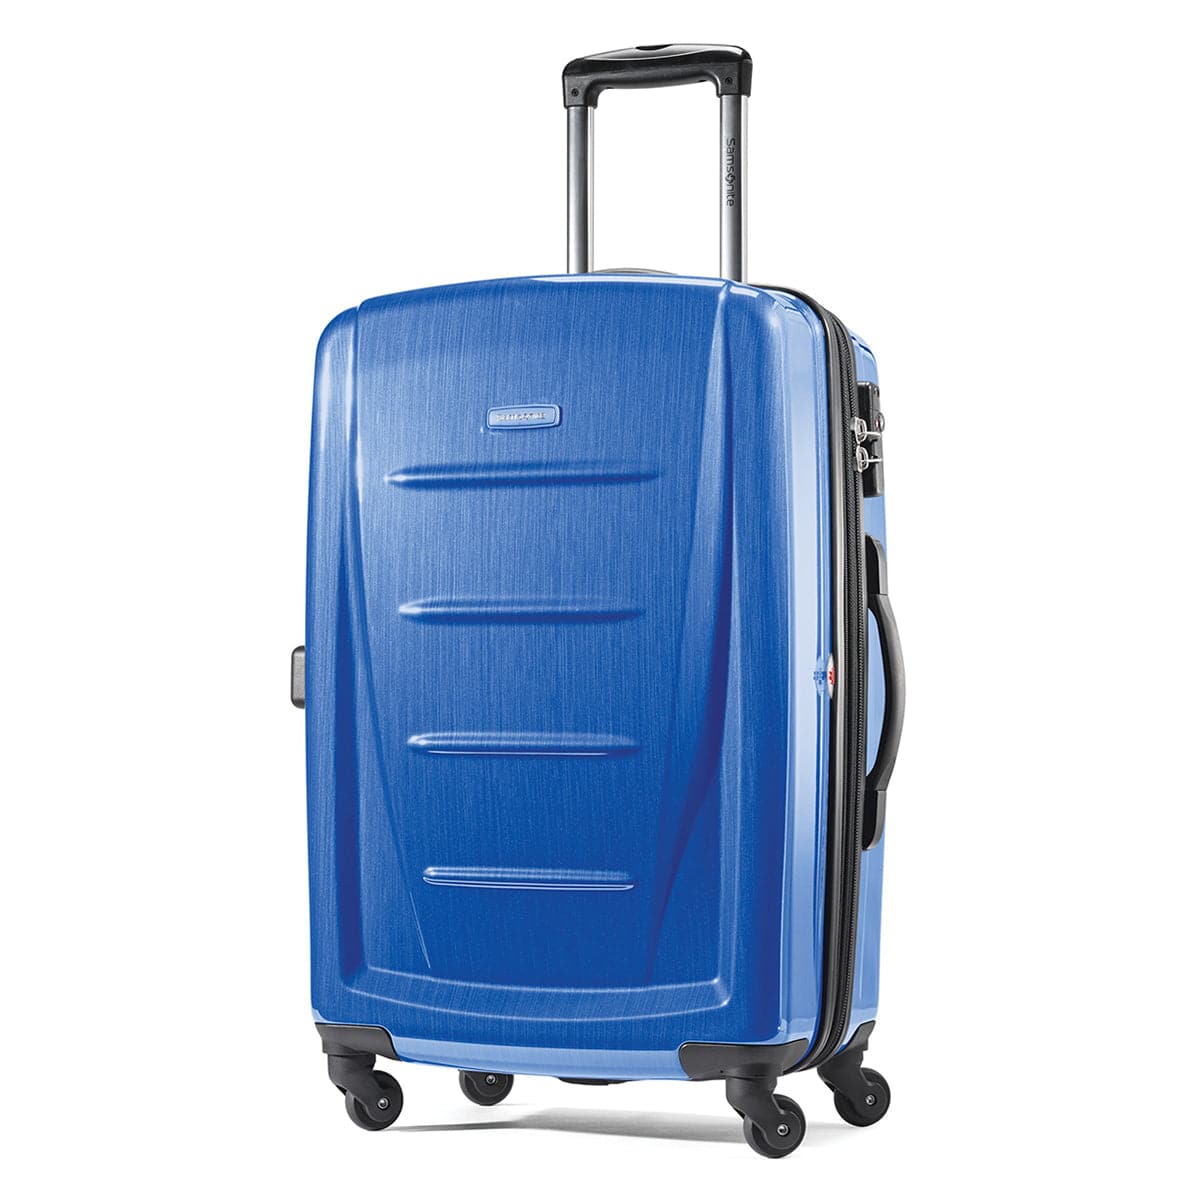 Samsonite Winfield 2 Fashion Hardside 24" Spinner Carry-On Luggage